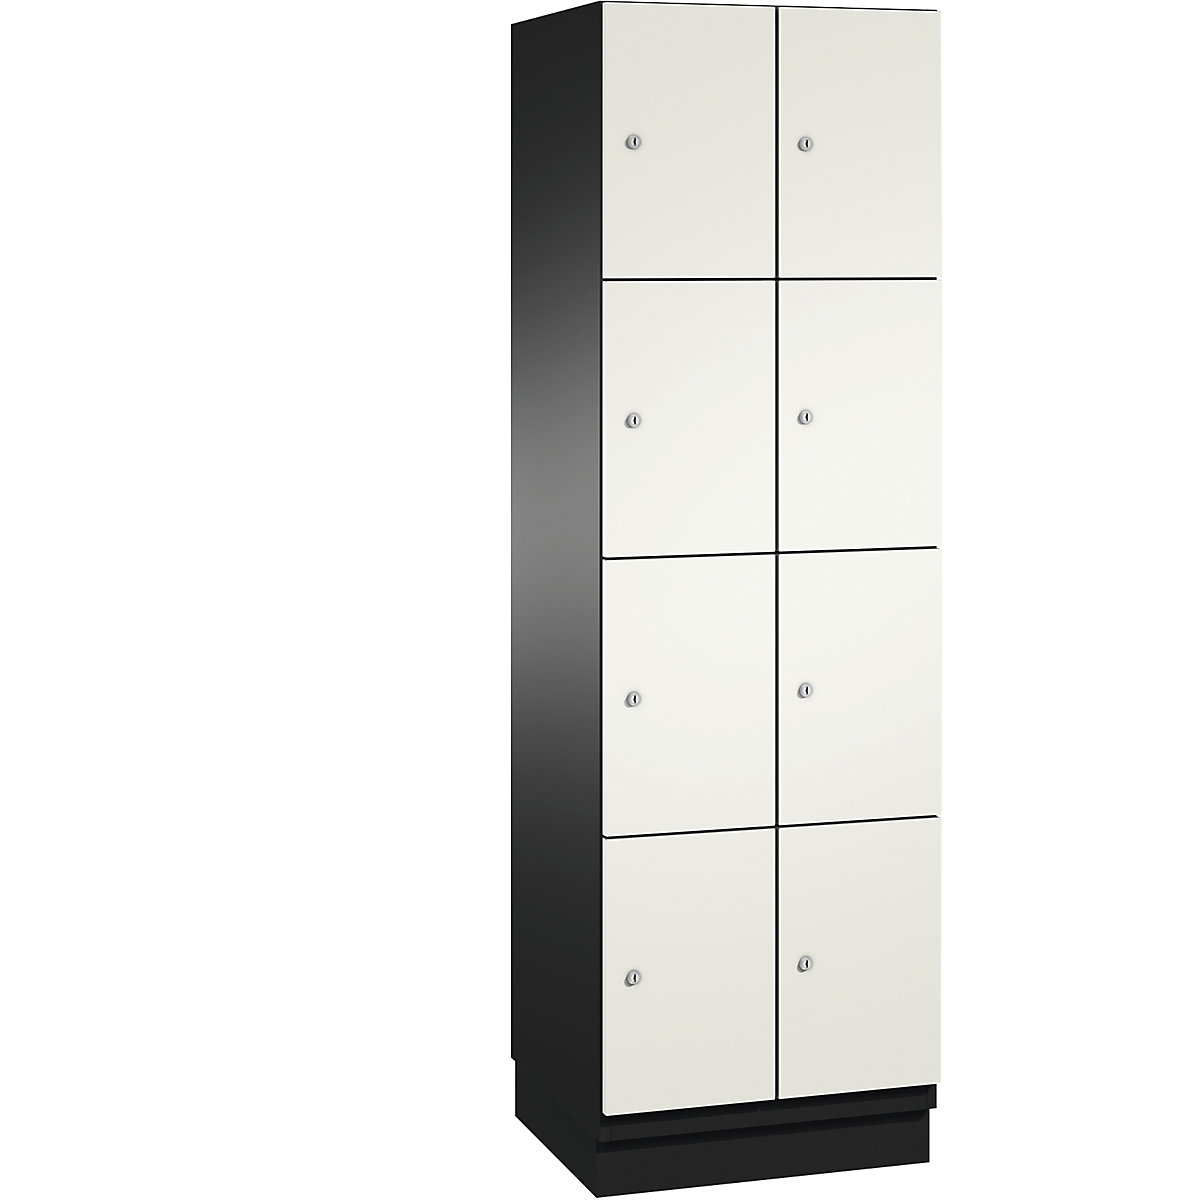 CAMBIO compartment locker with sheet steel doors – C+P, 8 compartments, width 600 mm, body black grey / door pure white-3